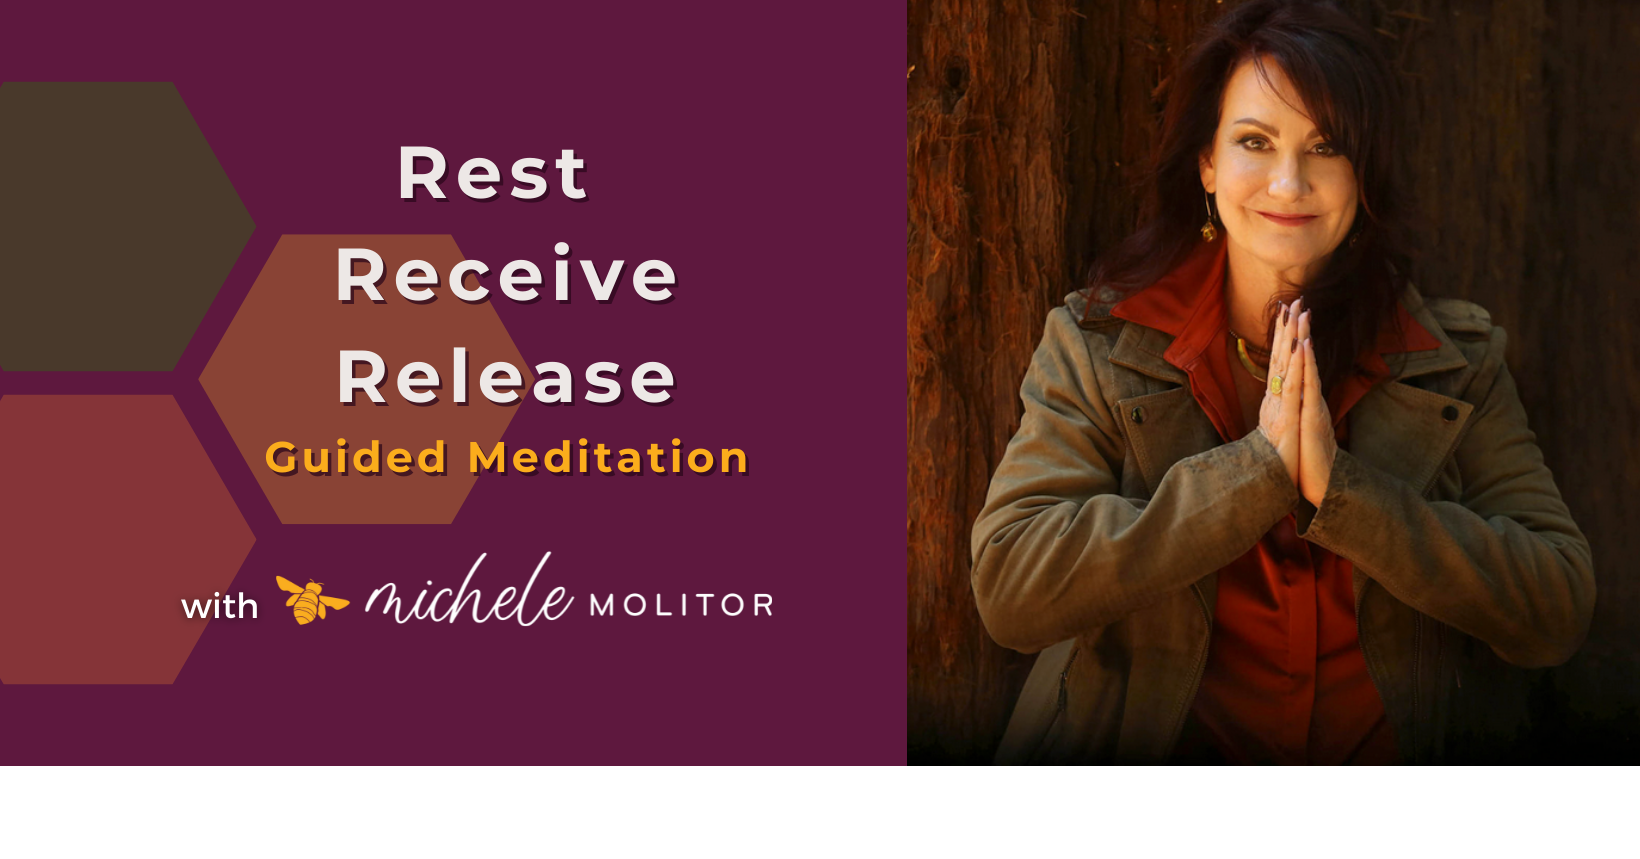 Rest Receive Release Guided Meditation